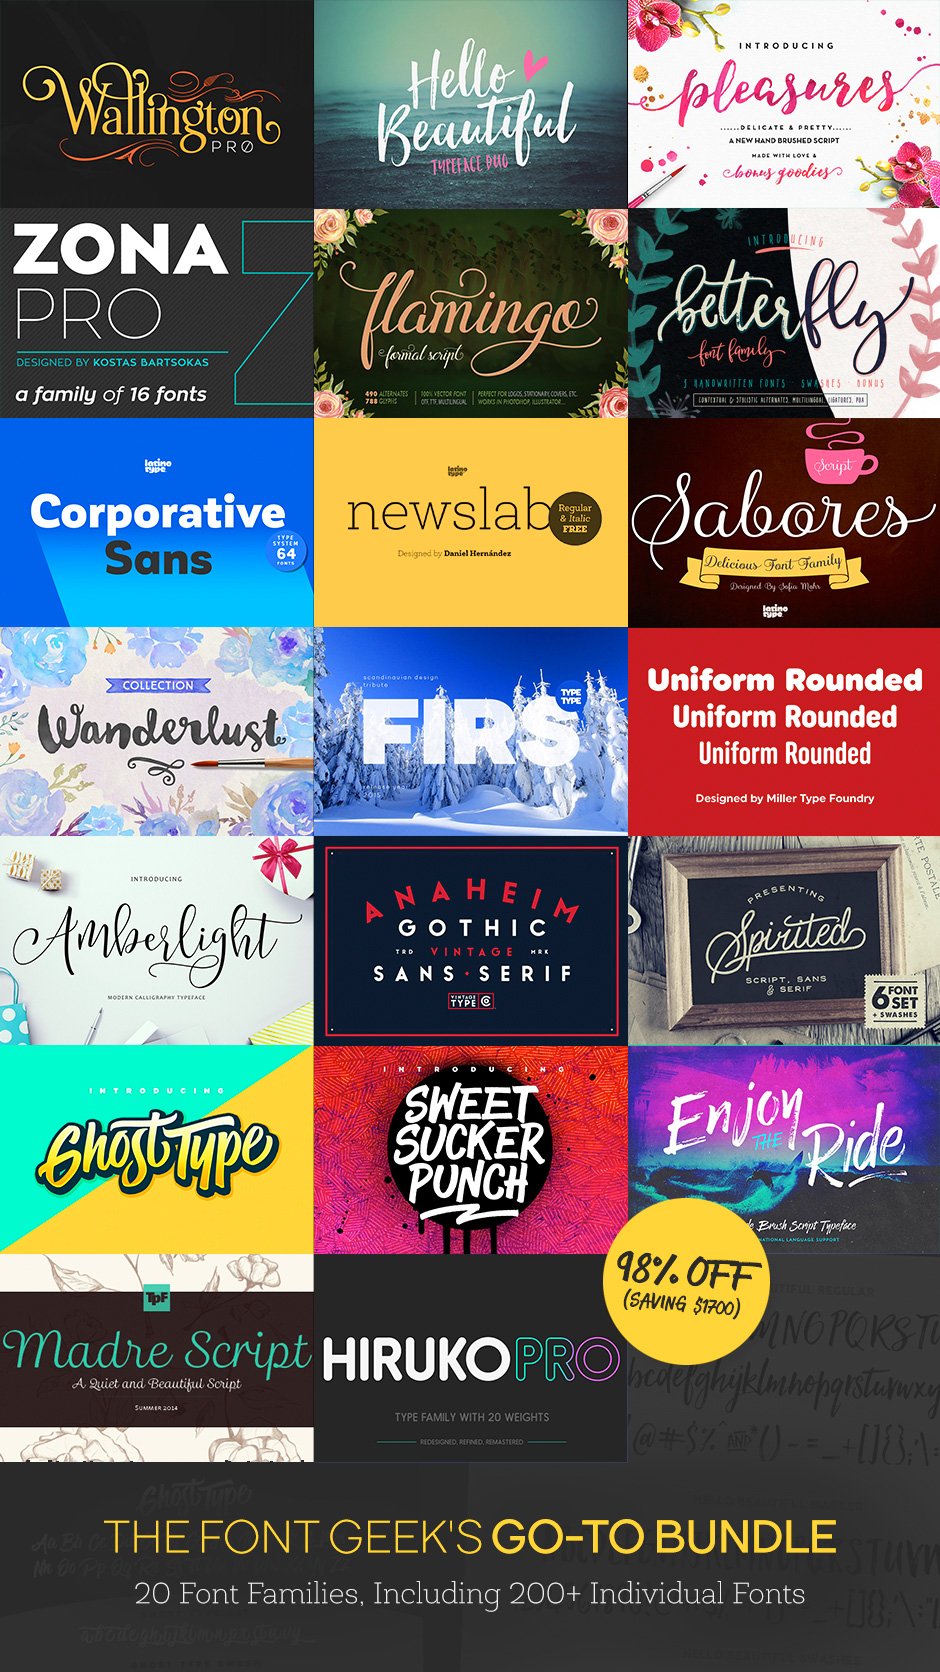 The Font Geek’s Go-to Bundle